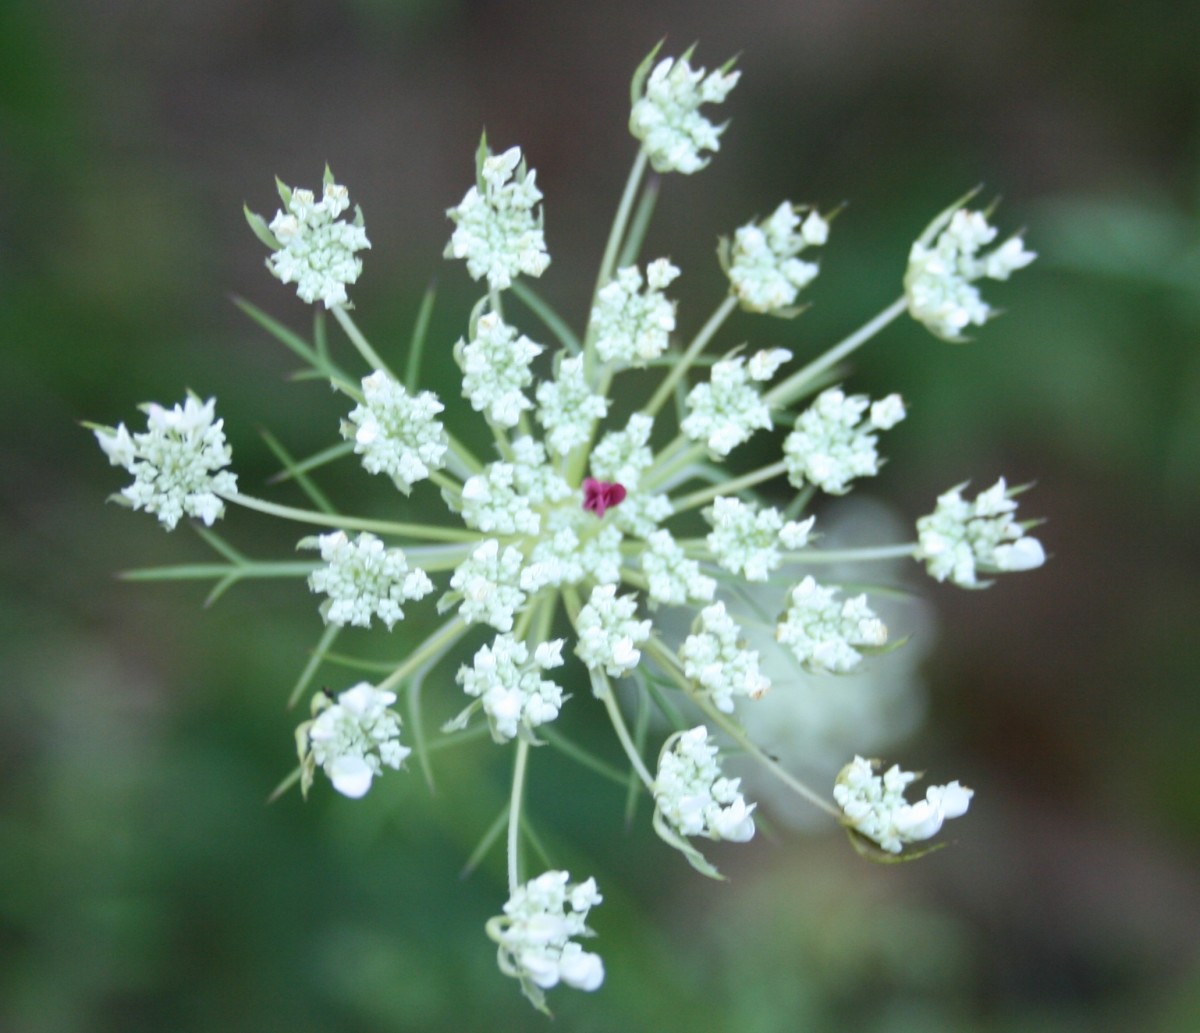 Also called wild carrot, Queen Anne's lace is another wildflower well-loved by many pollinators, including butterflies.